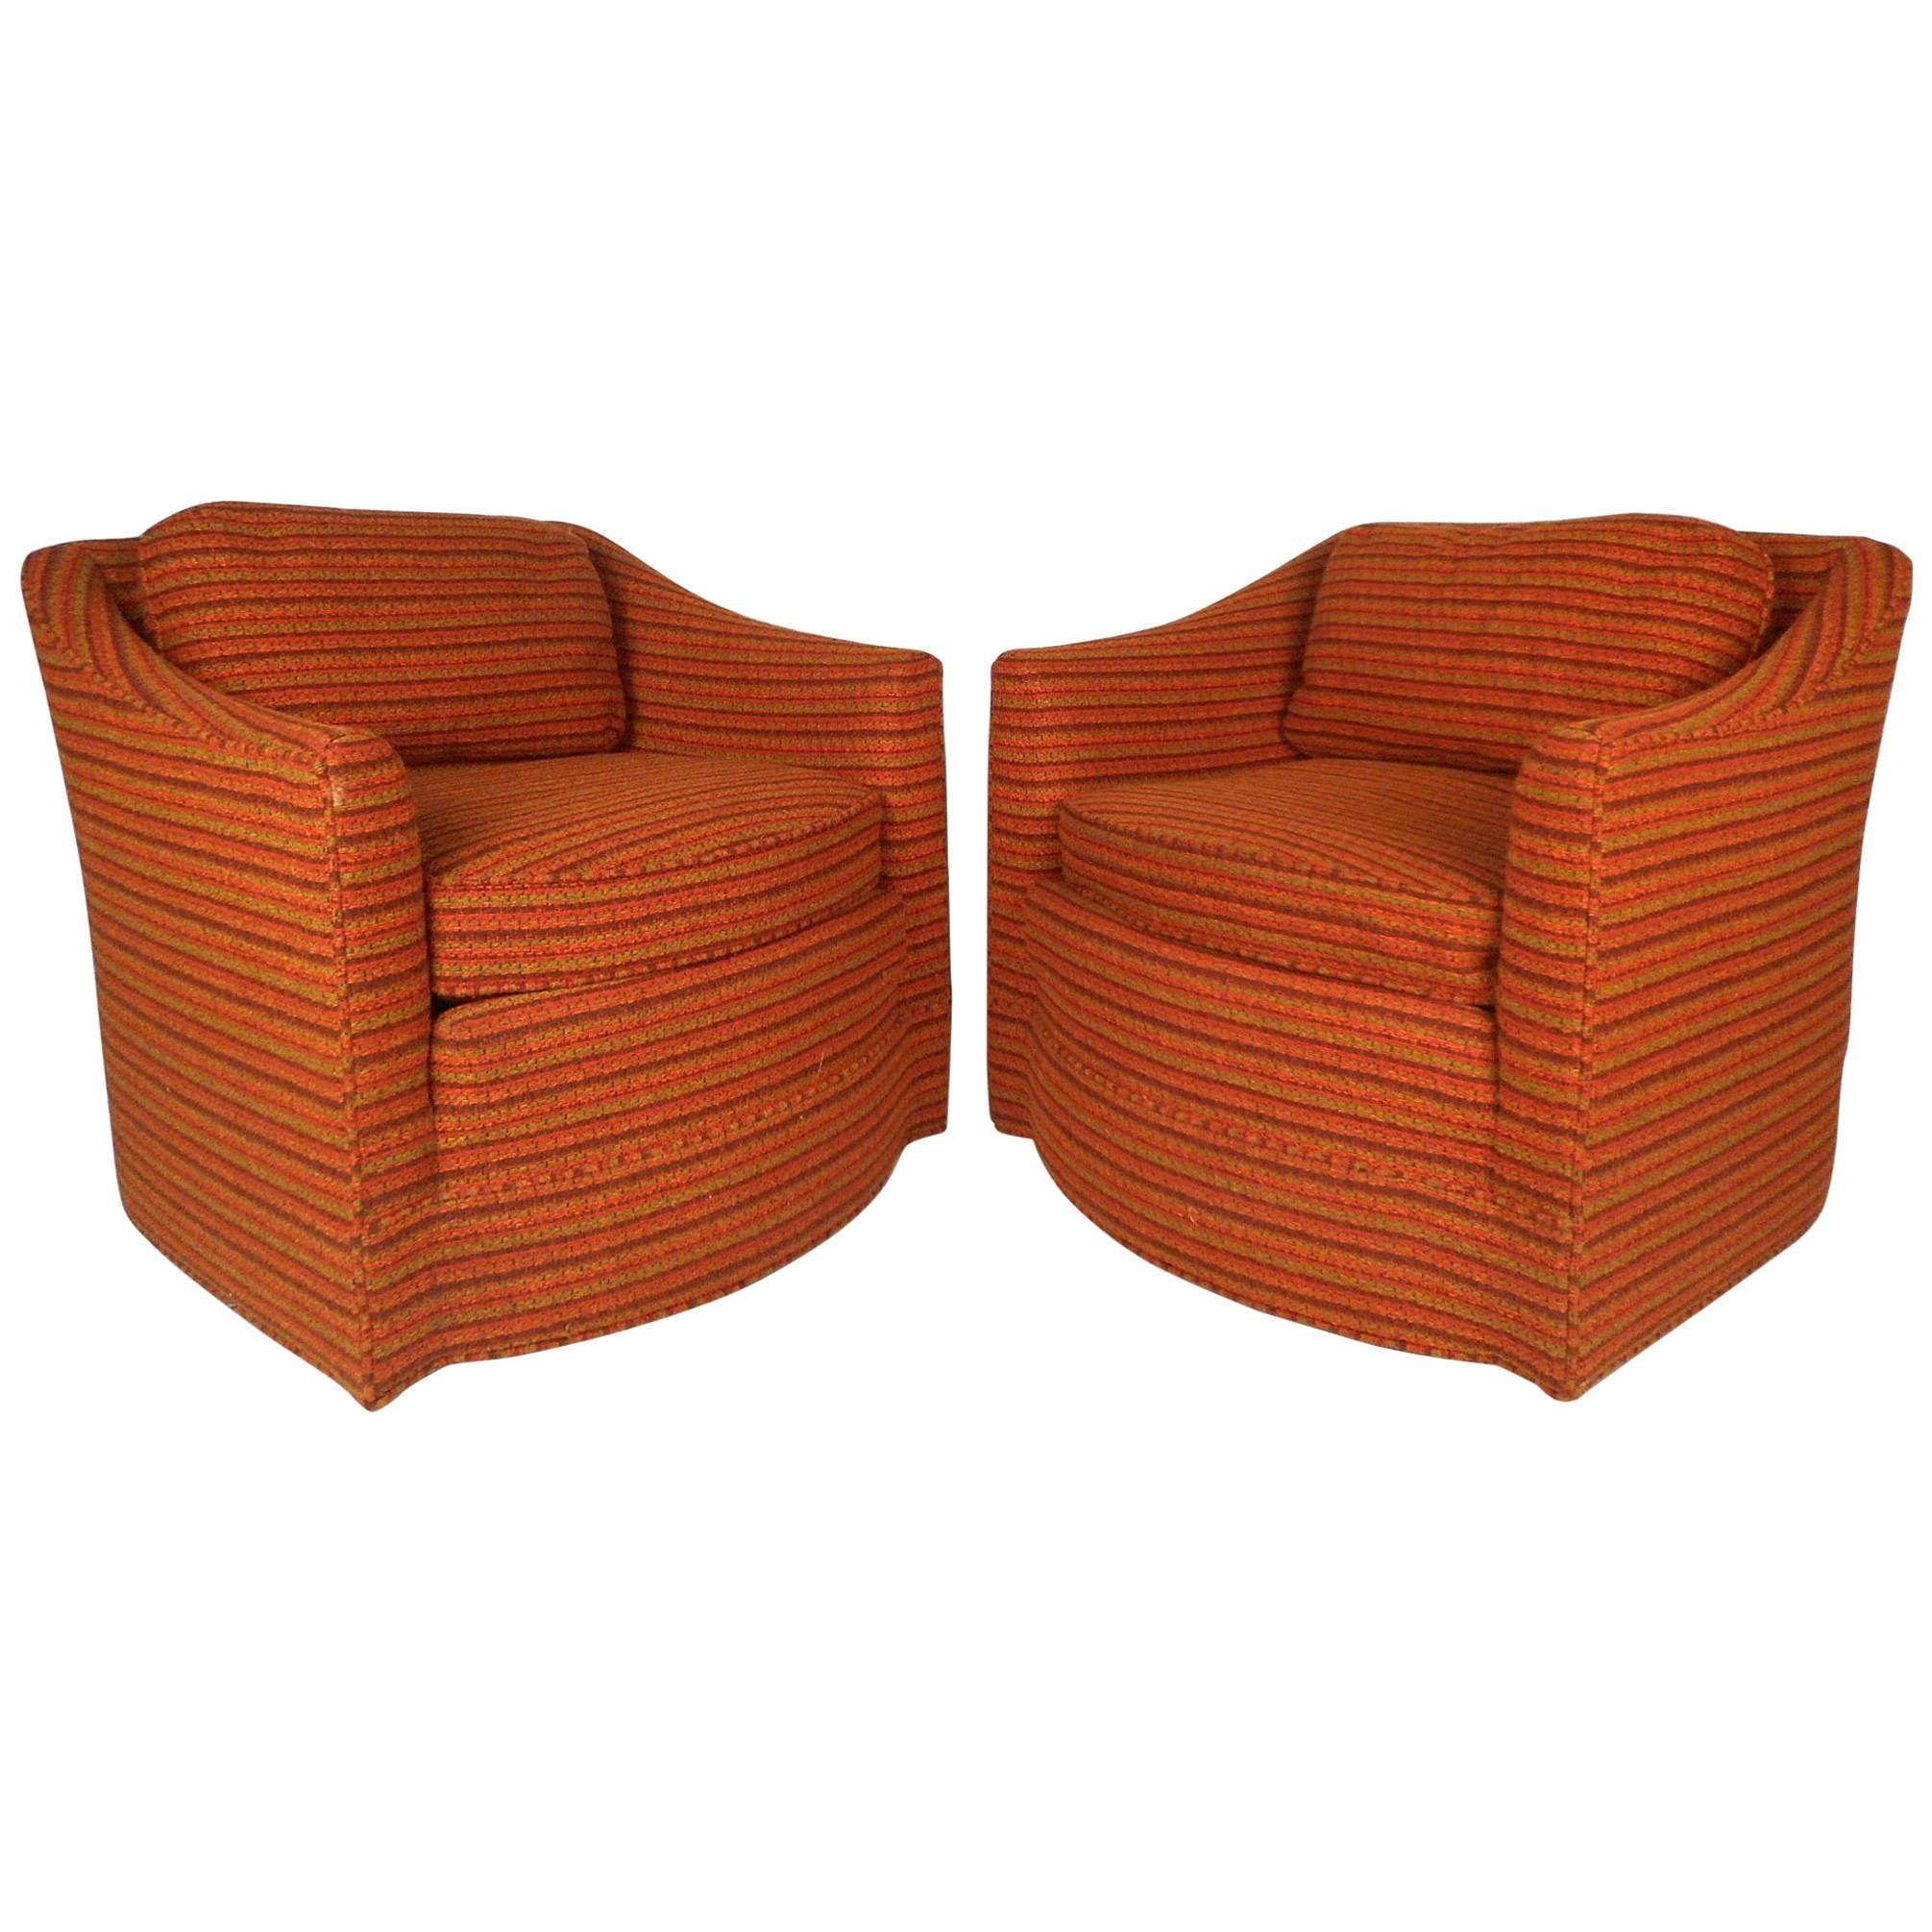 Pair of Mid-Century Modern Upholstered Lounge Chairs by Century Furniture